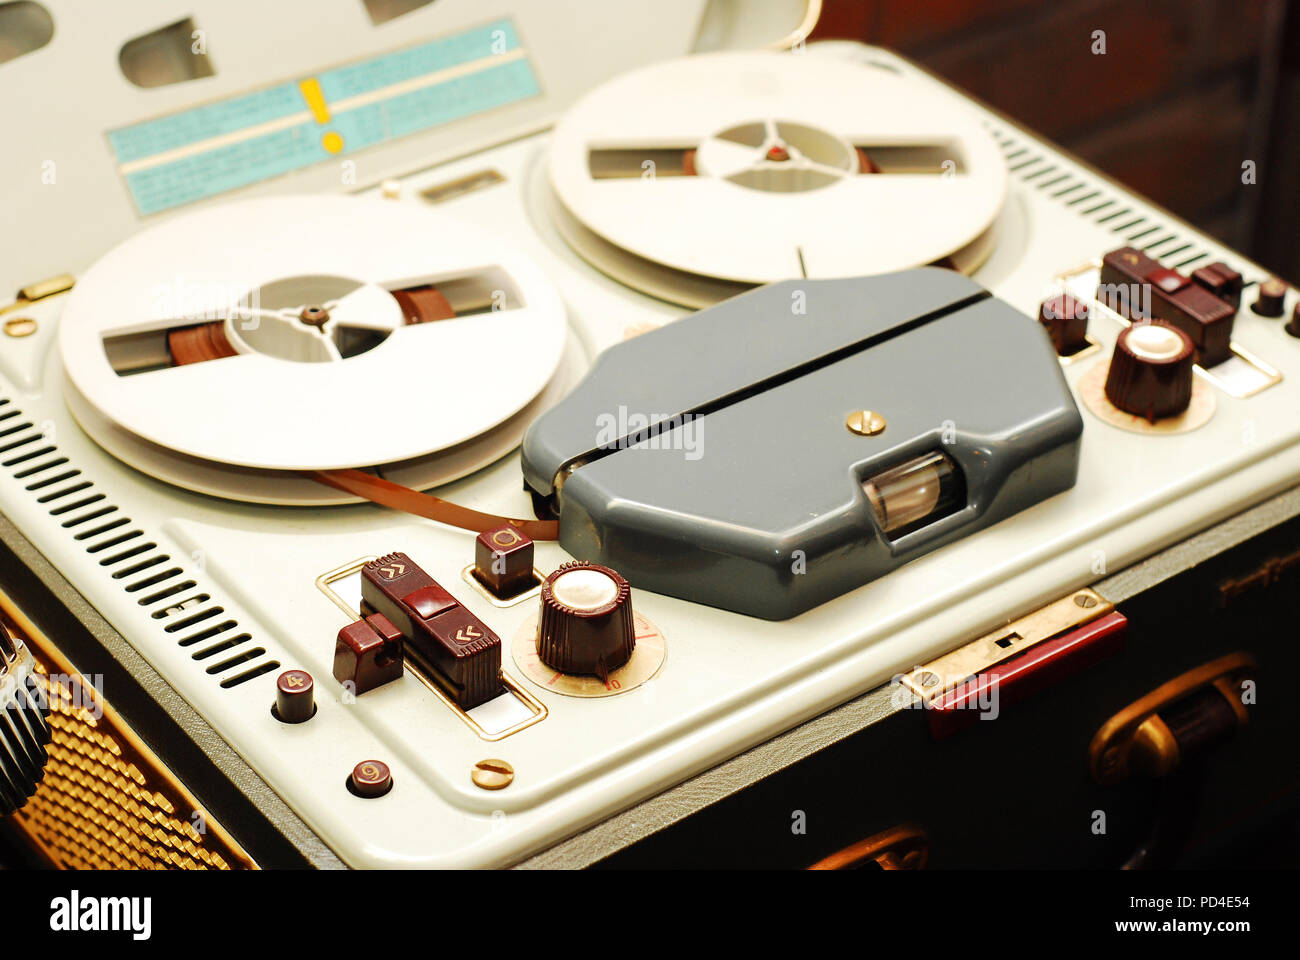 Old reel-to-reel recorder with magnetic tape on it Stock Photo - Alamy